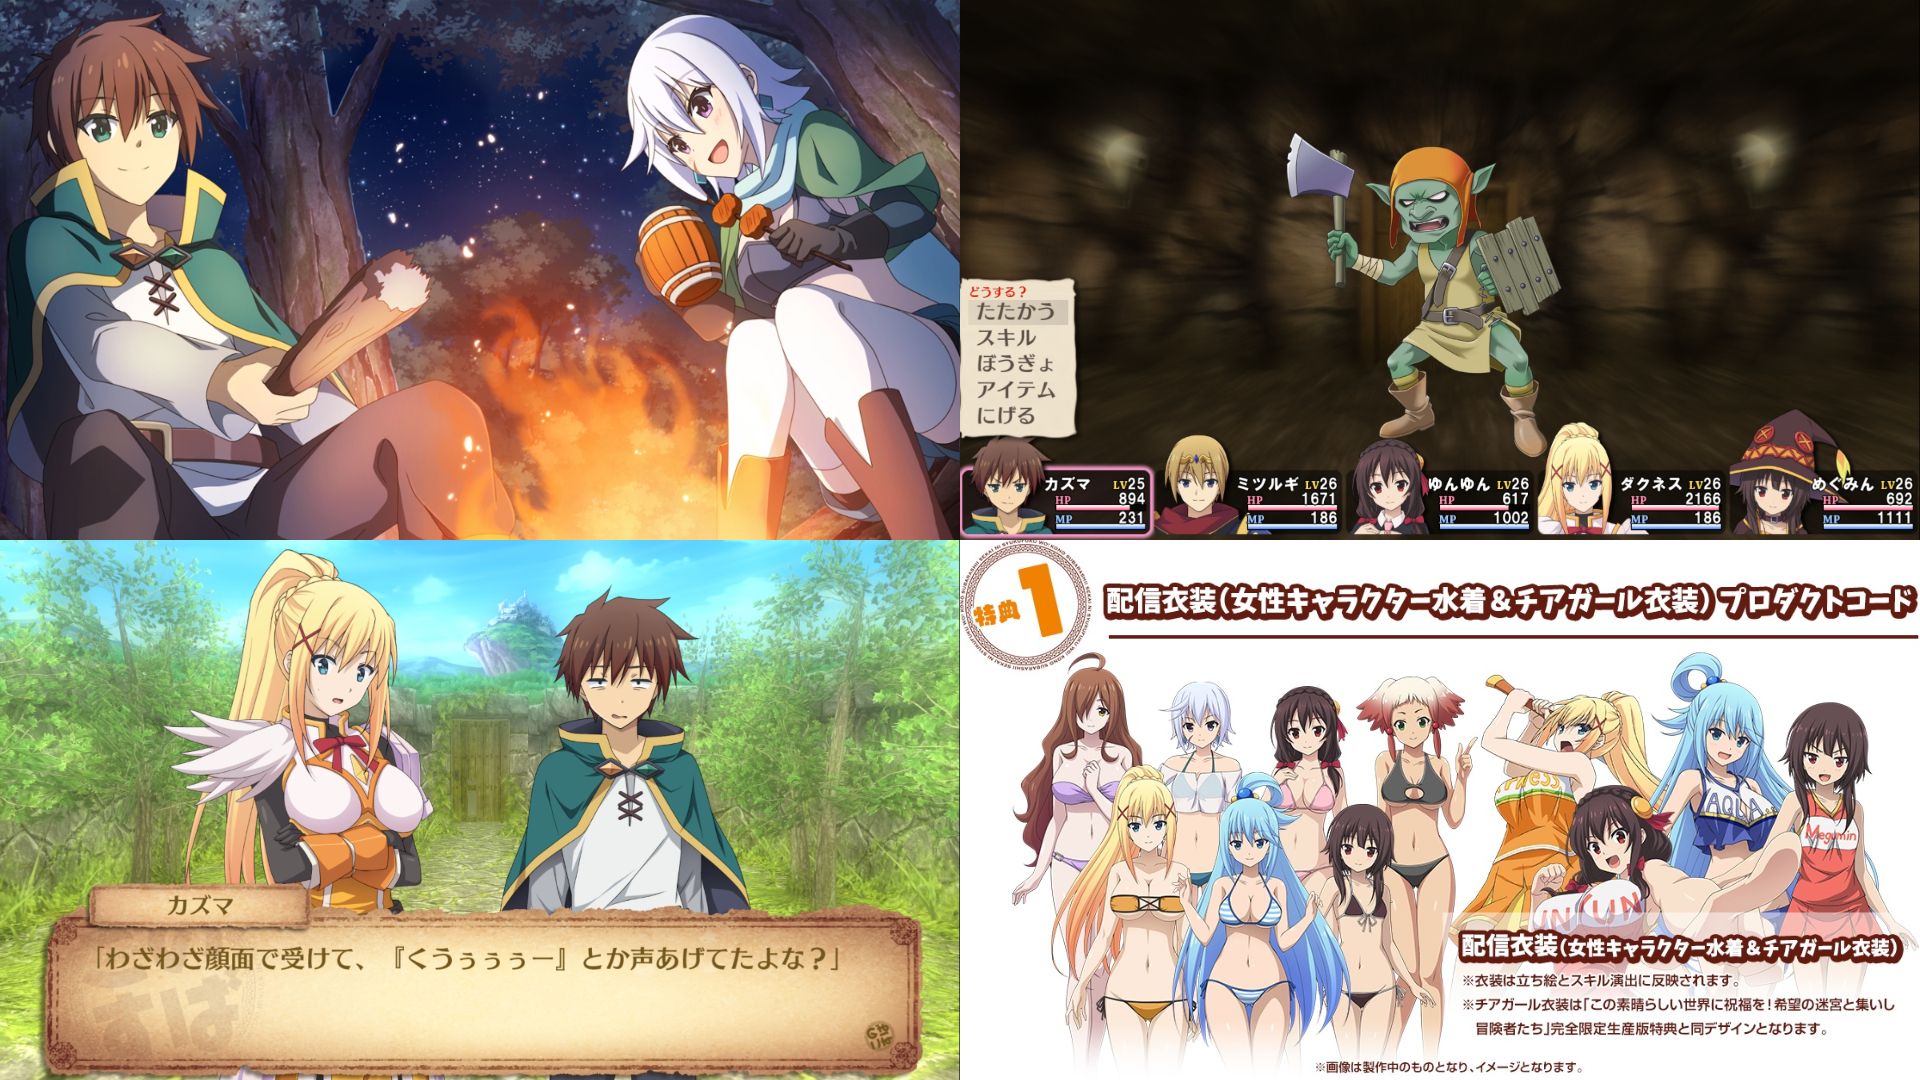 KonoSuba God's Blessing on this Wonderful World! Labyrinth of Hope and the Gathering Adventurers Plus feature